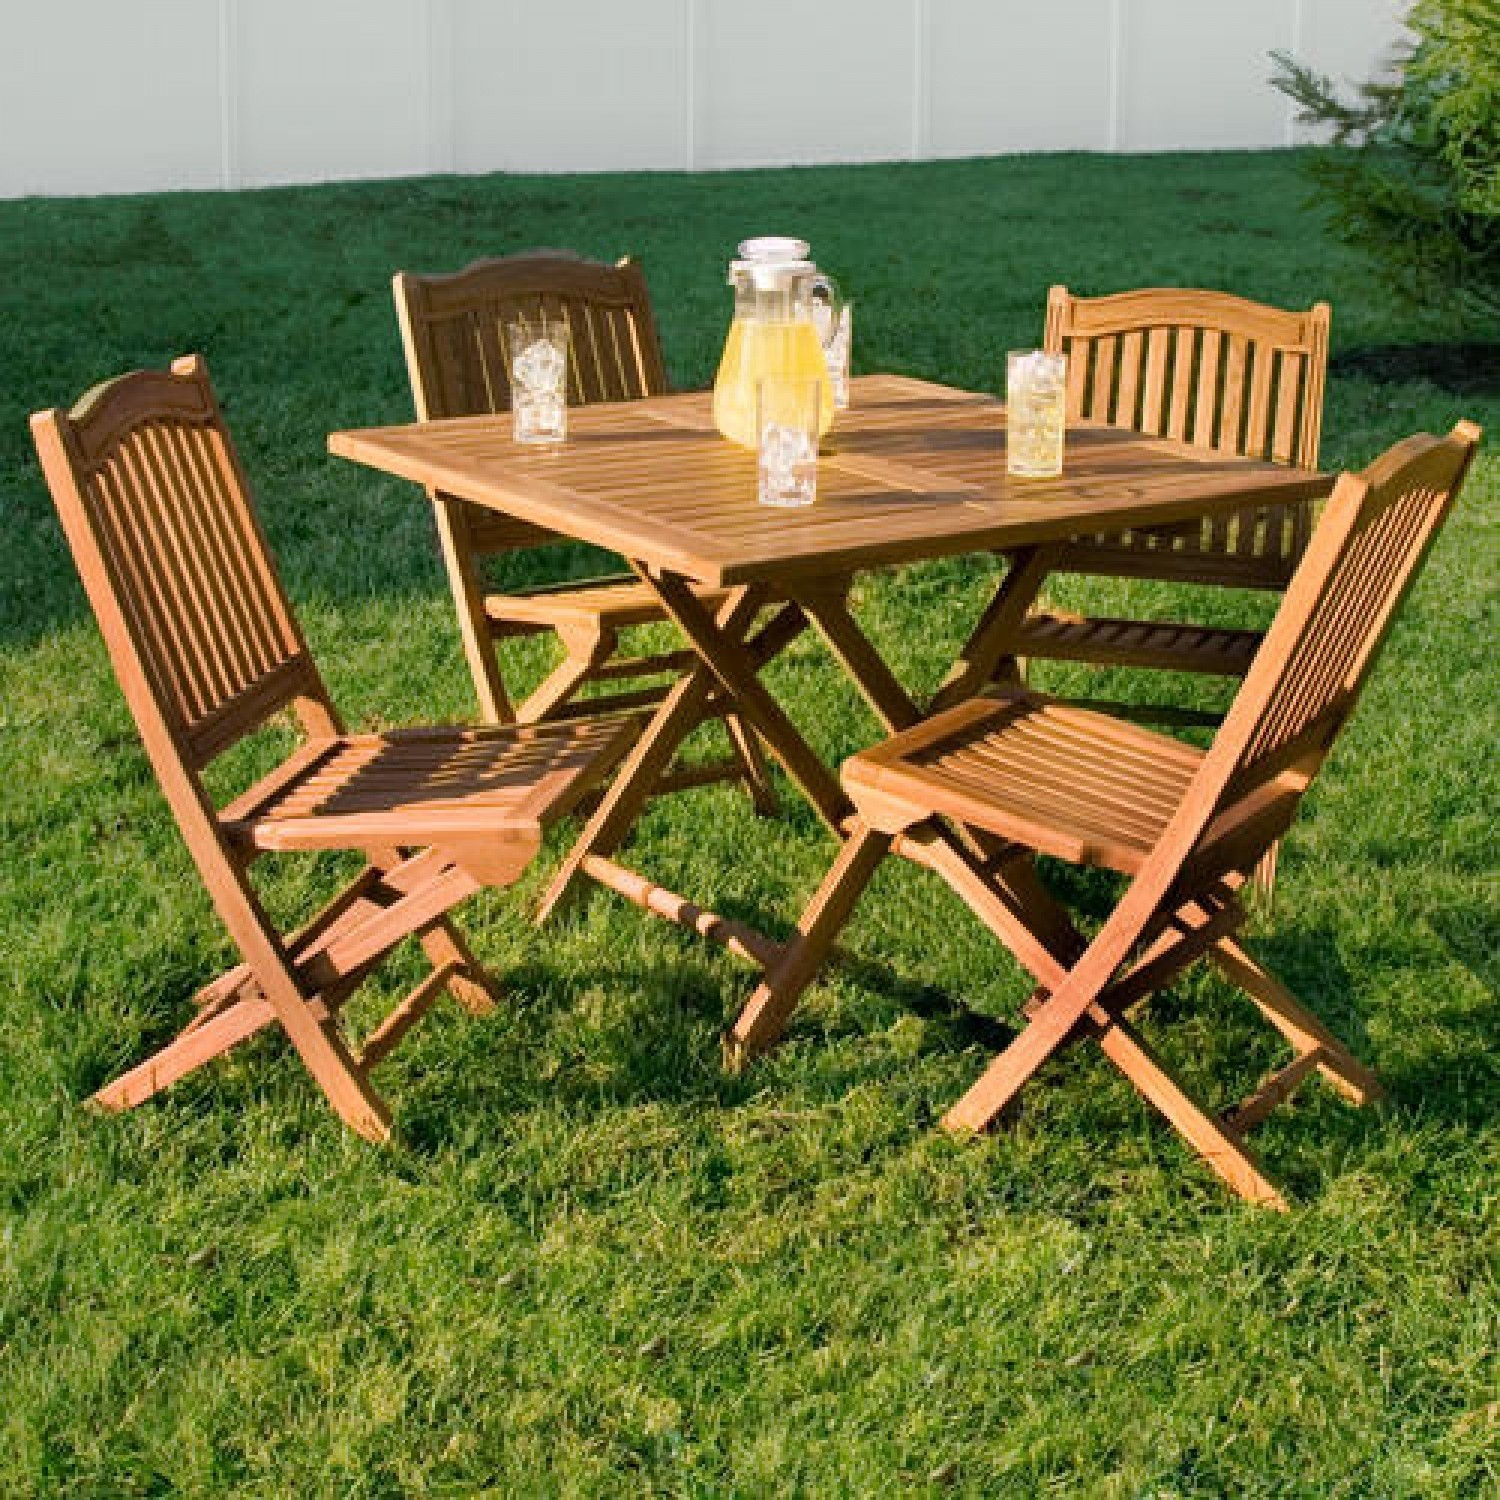 Teak folding table and chairs